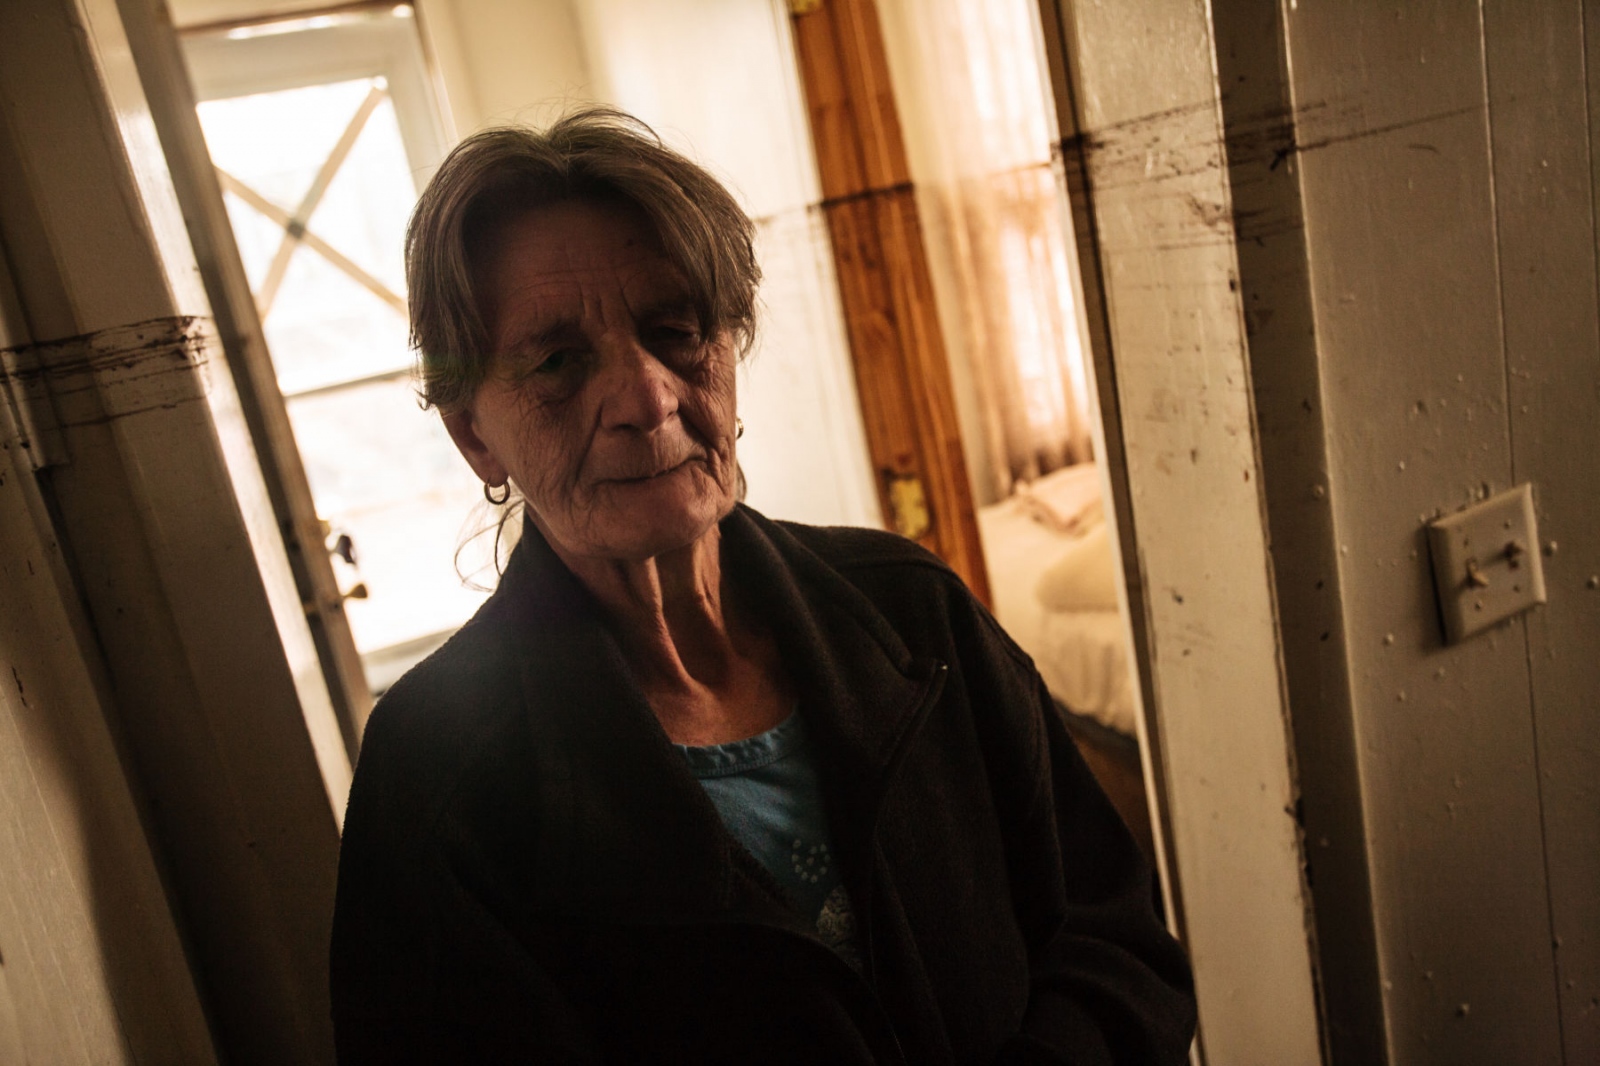 The Rockaways After Hurricane Sandy - Marion Millinghaus, aged 70, enters her apartment after...